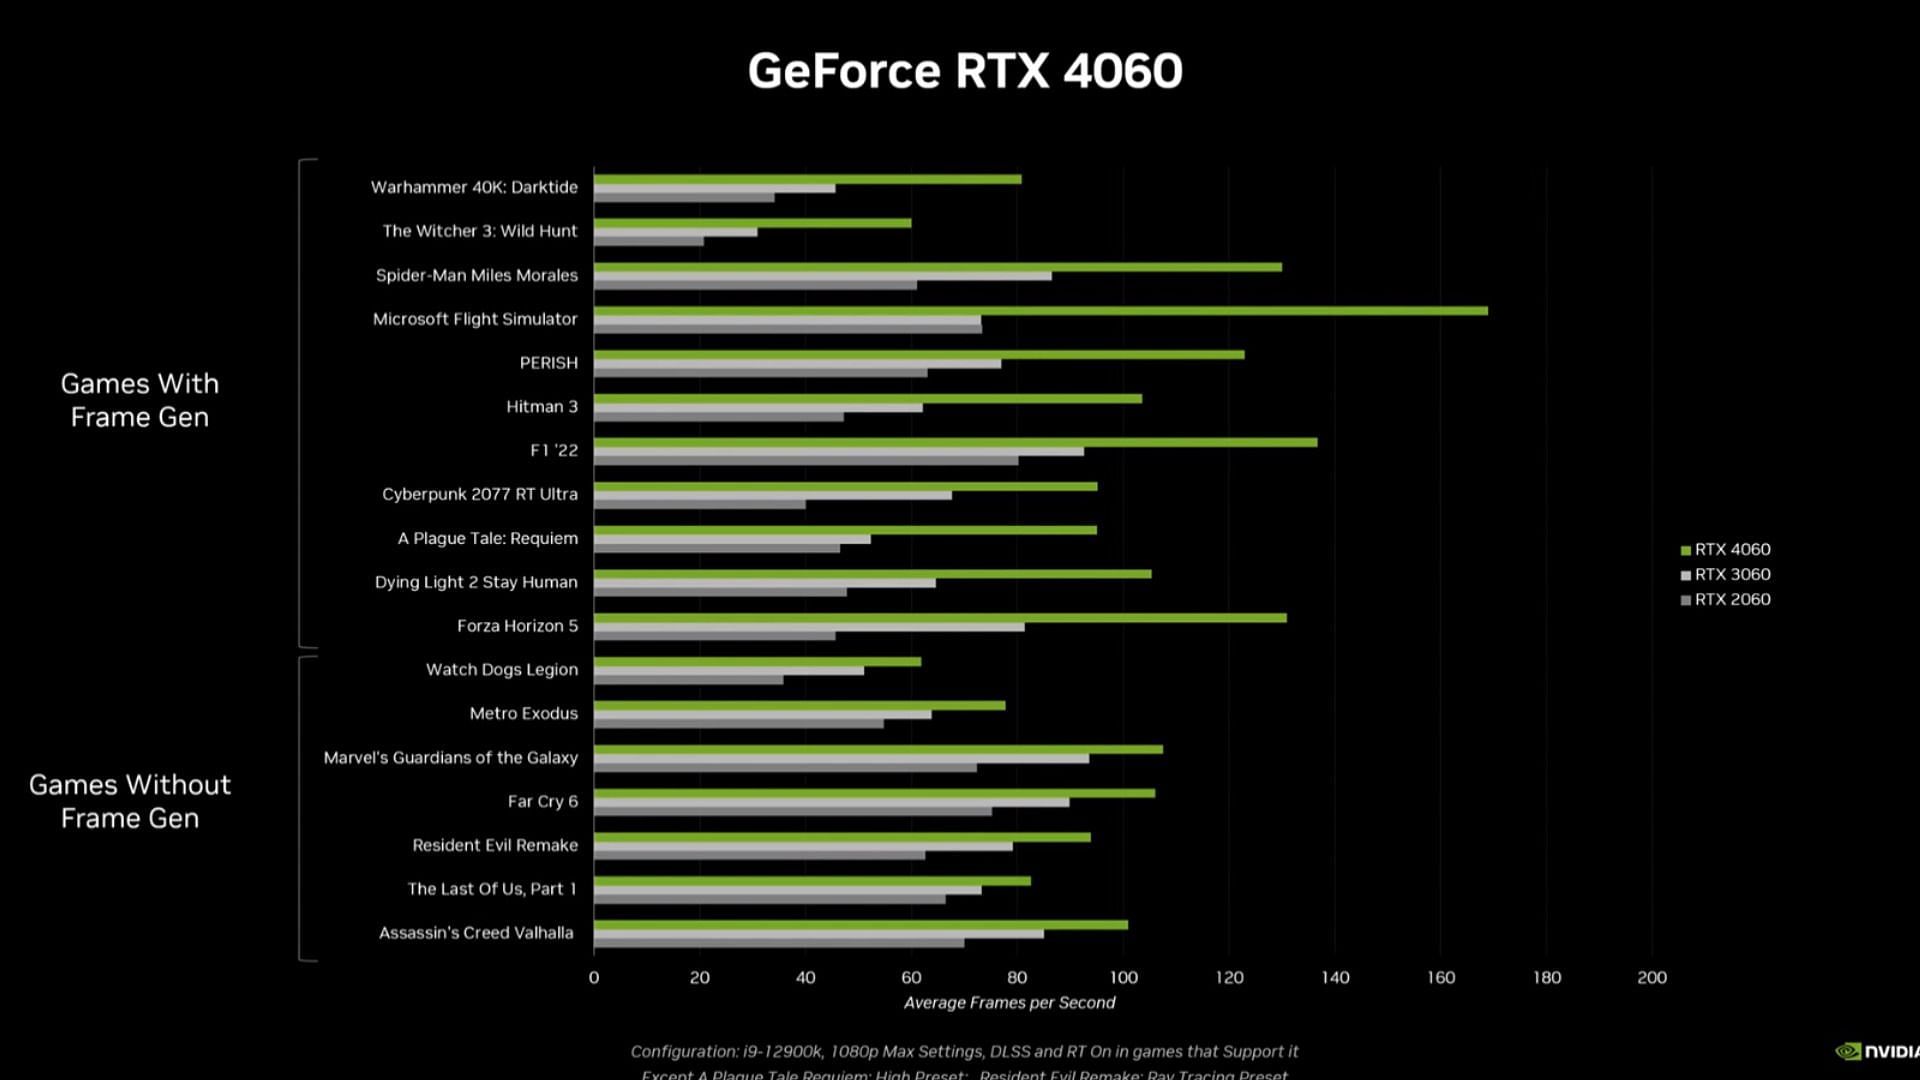 Performance gains with the RTX 4060 (Image via Nvidia)